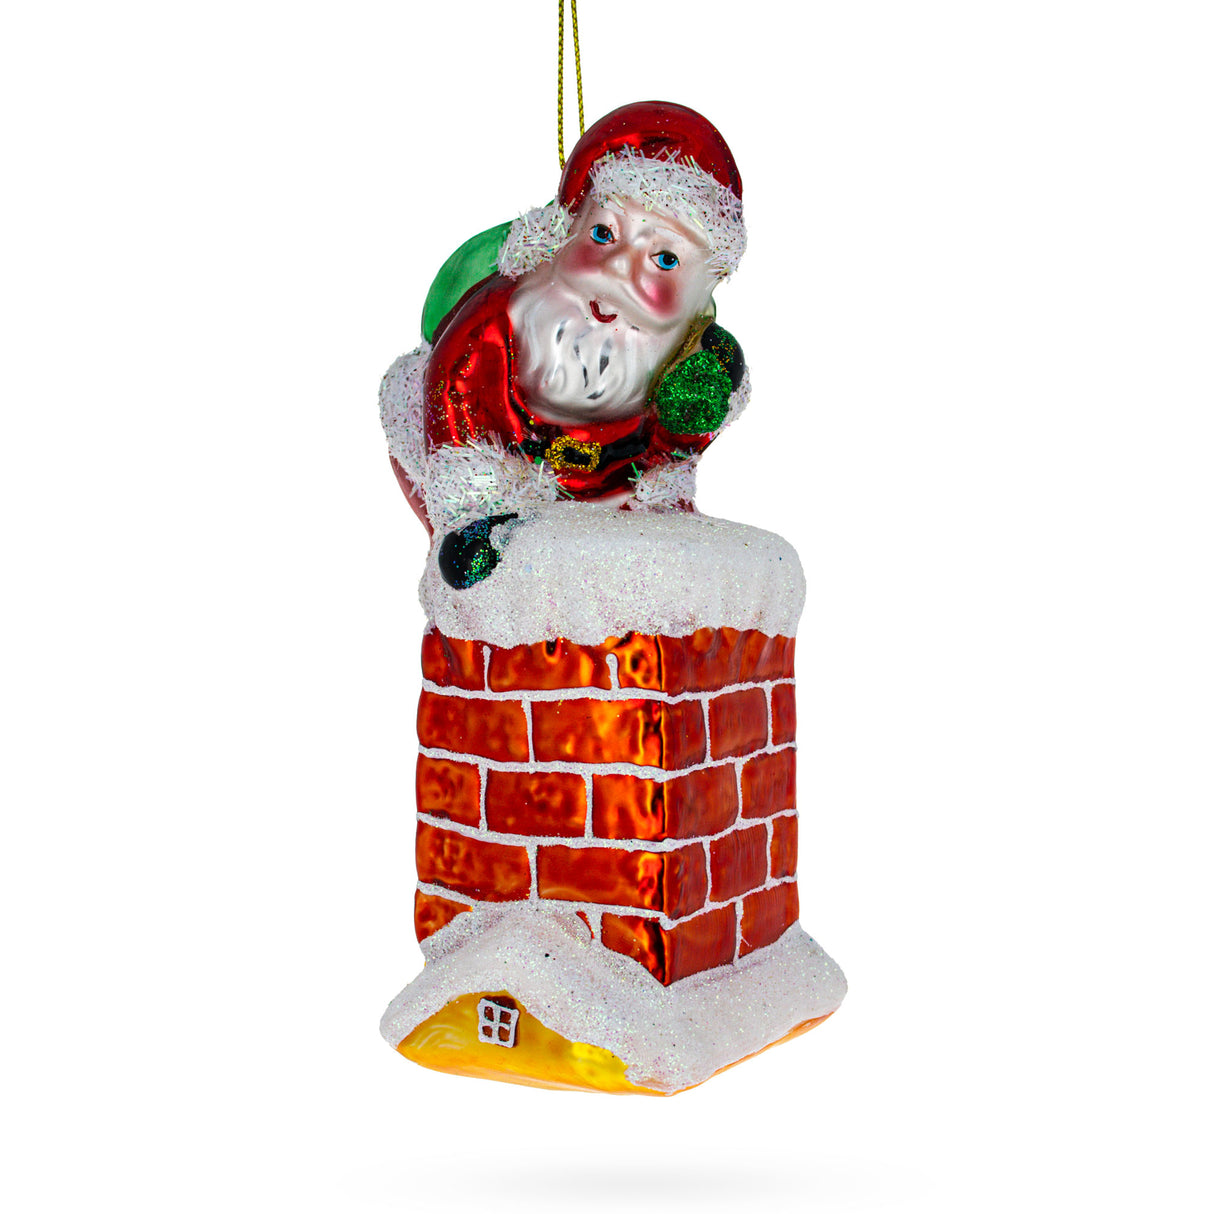 Glass Santa Climbing Chimney - Festive Blown Glass Christmas Ornament in Red color